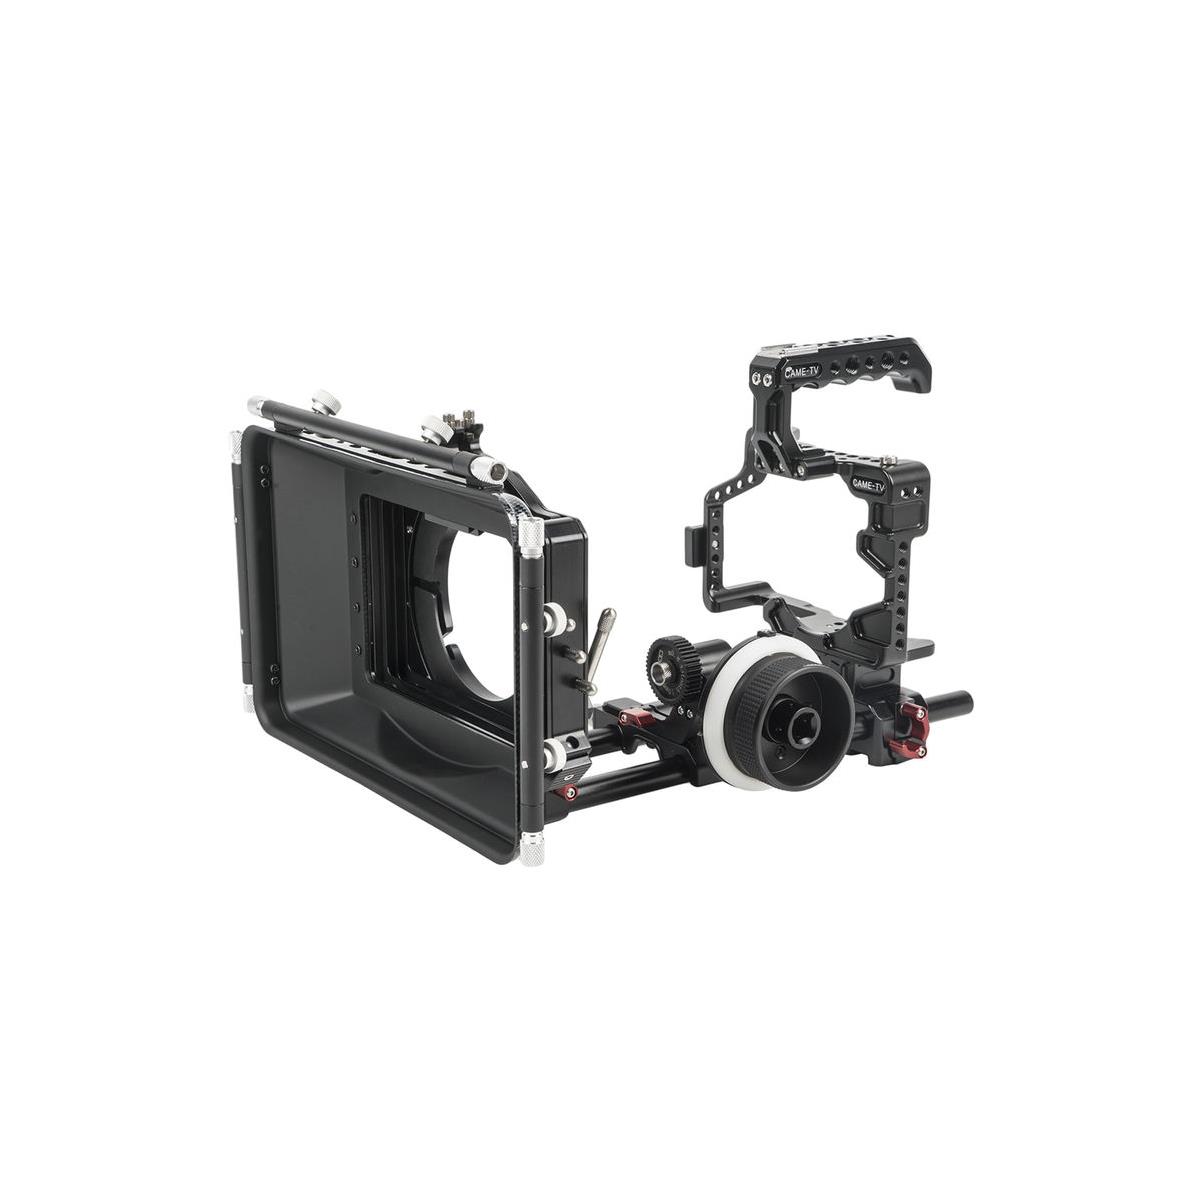 Came-TV GH5-PACK